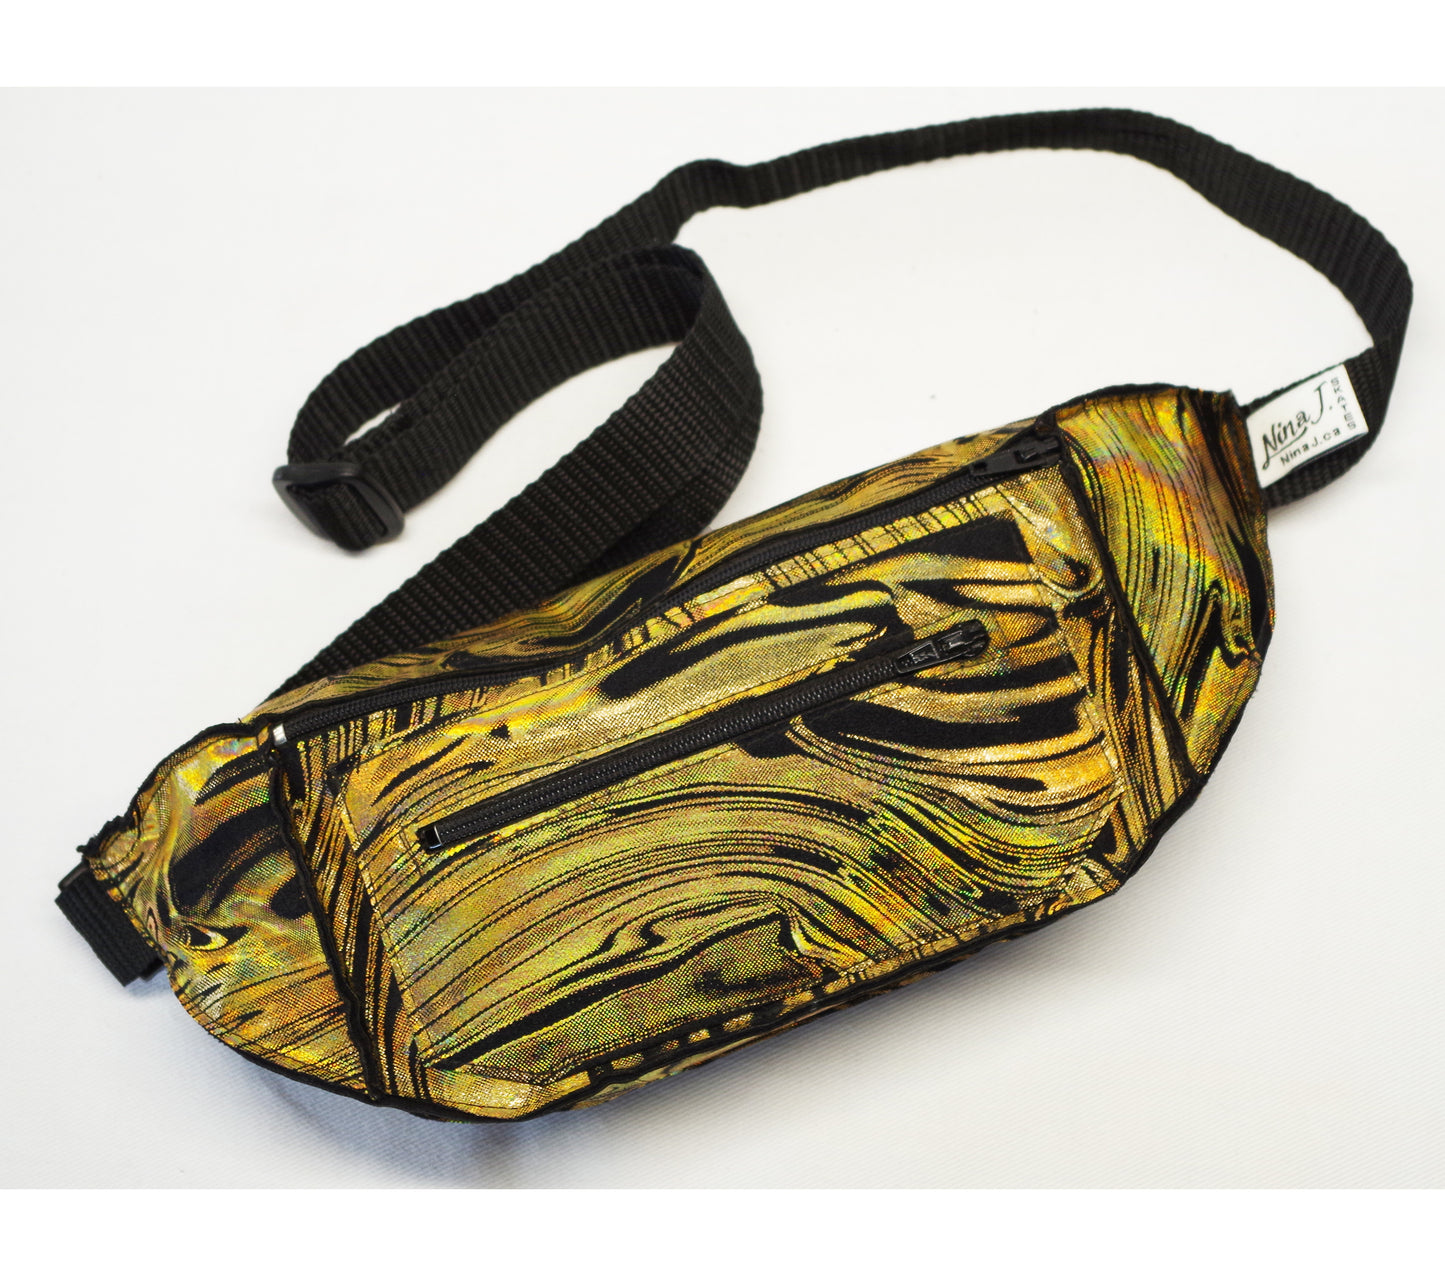 Festival Fanny Pack in Gold Iridescent Marble